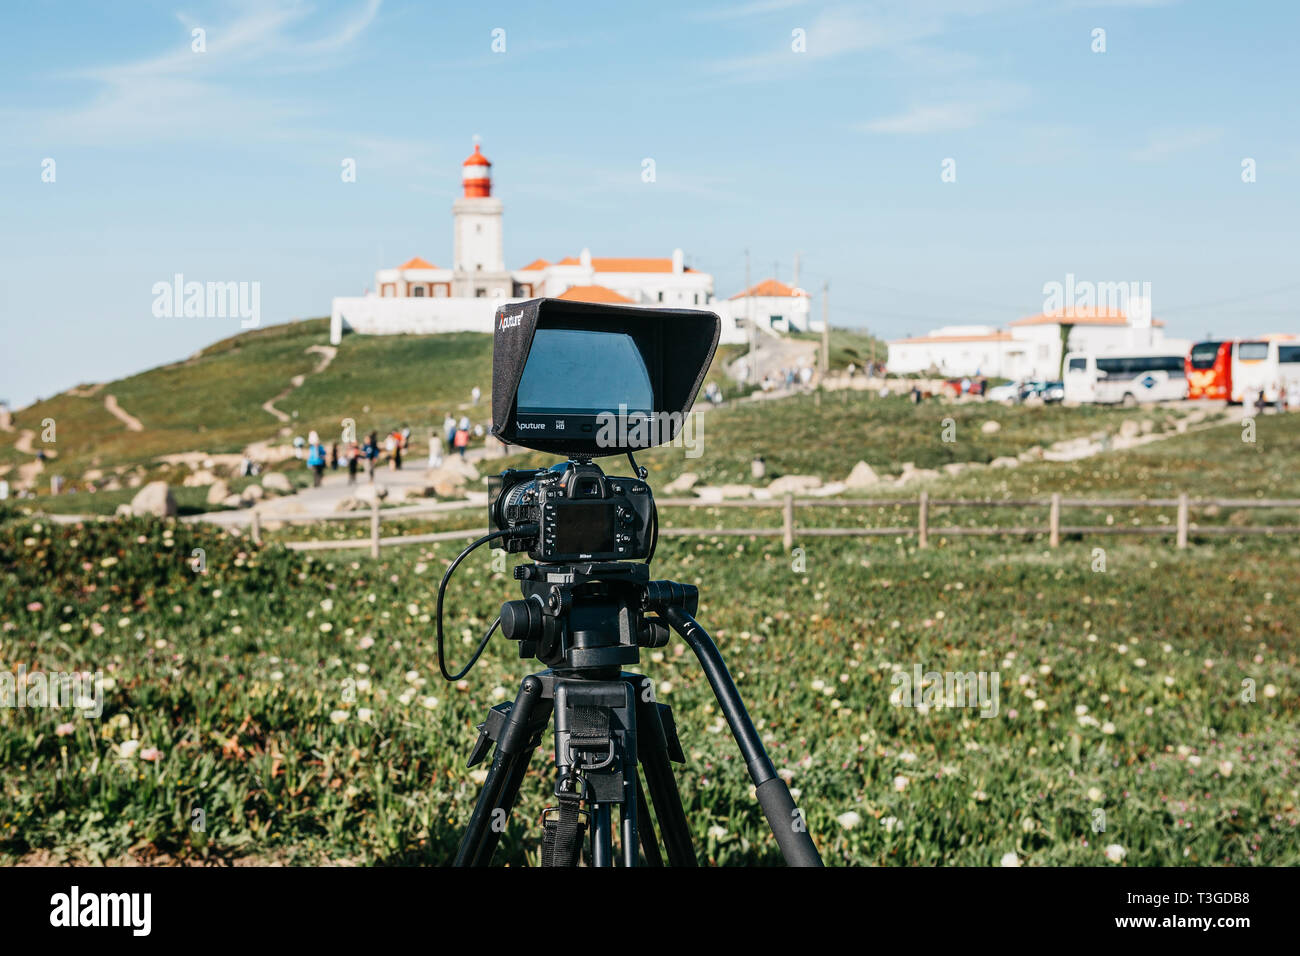 Portugal, Sintra, June 26, 2018: A close-up camera for a photo or a video camera for recording video from Nikon. Ahead is the lighthouse on Cape Roca Stock Photo